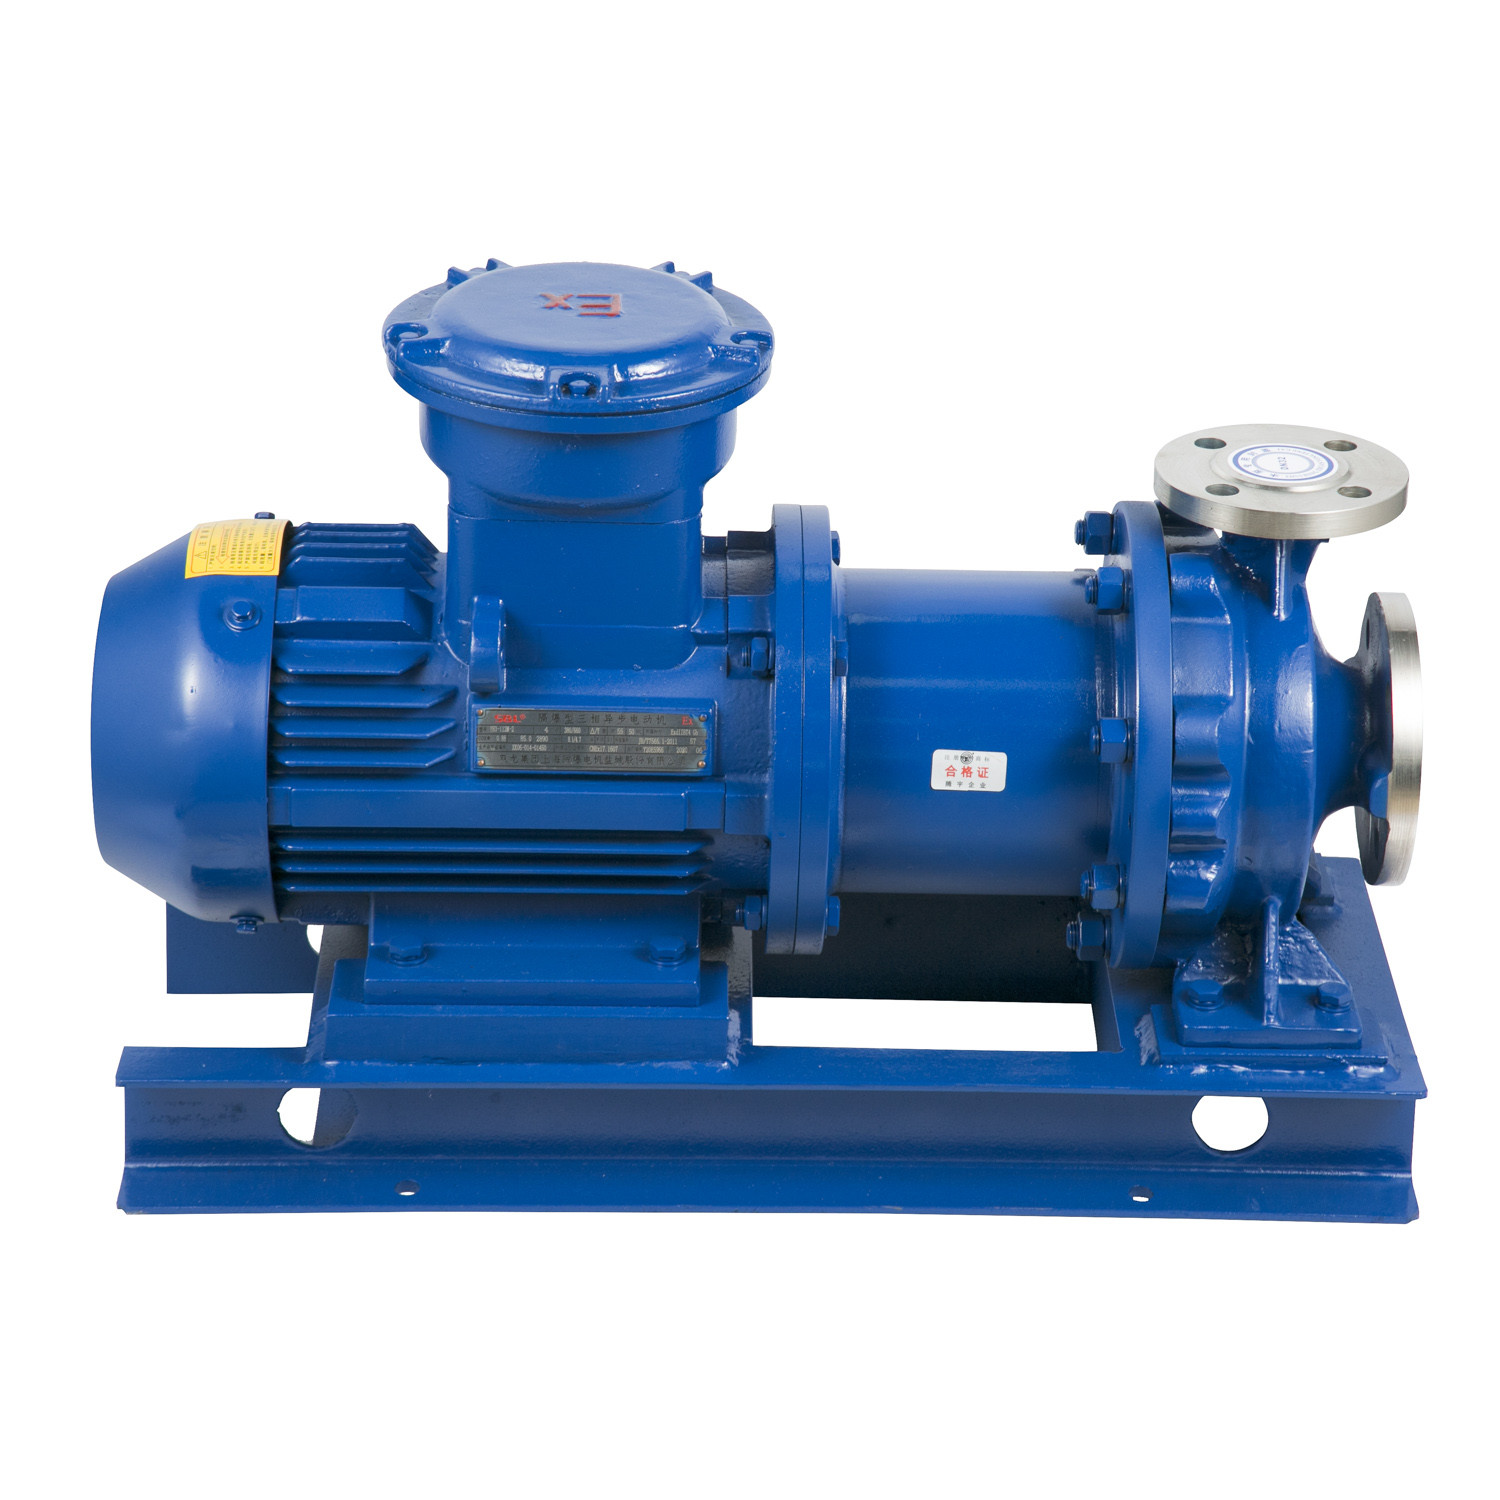 The Difference Between Magnetic Drive Pumps and Other Pumps